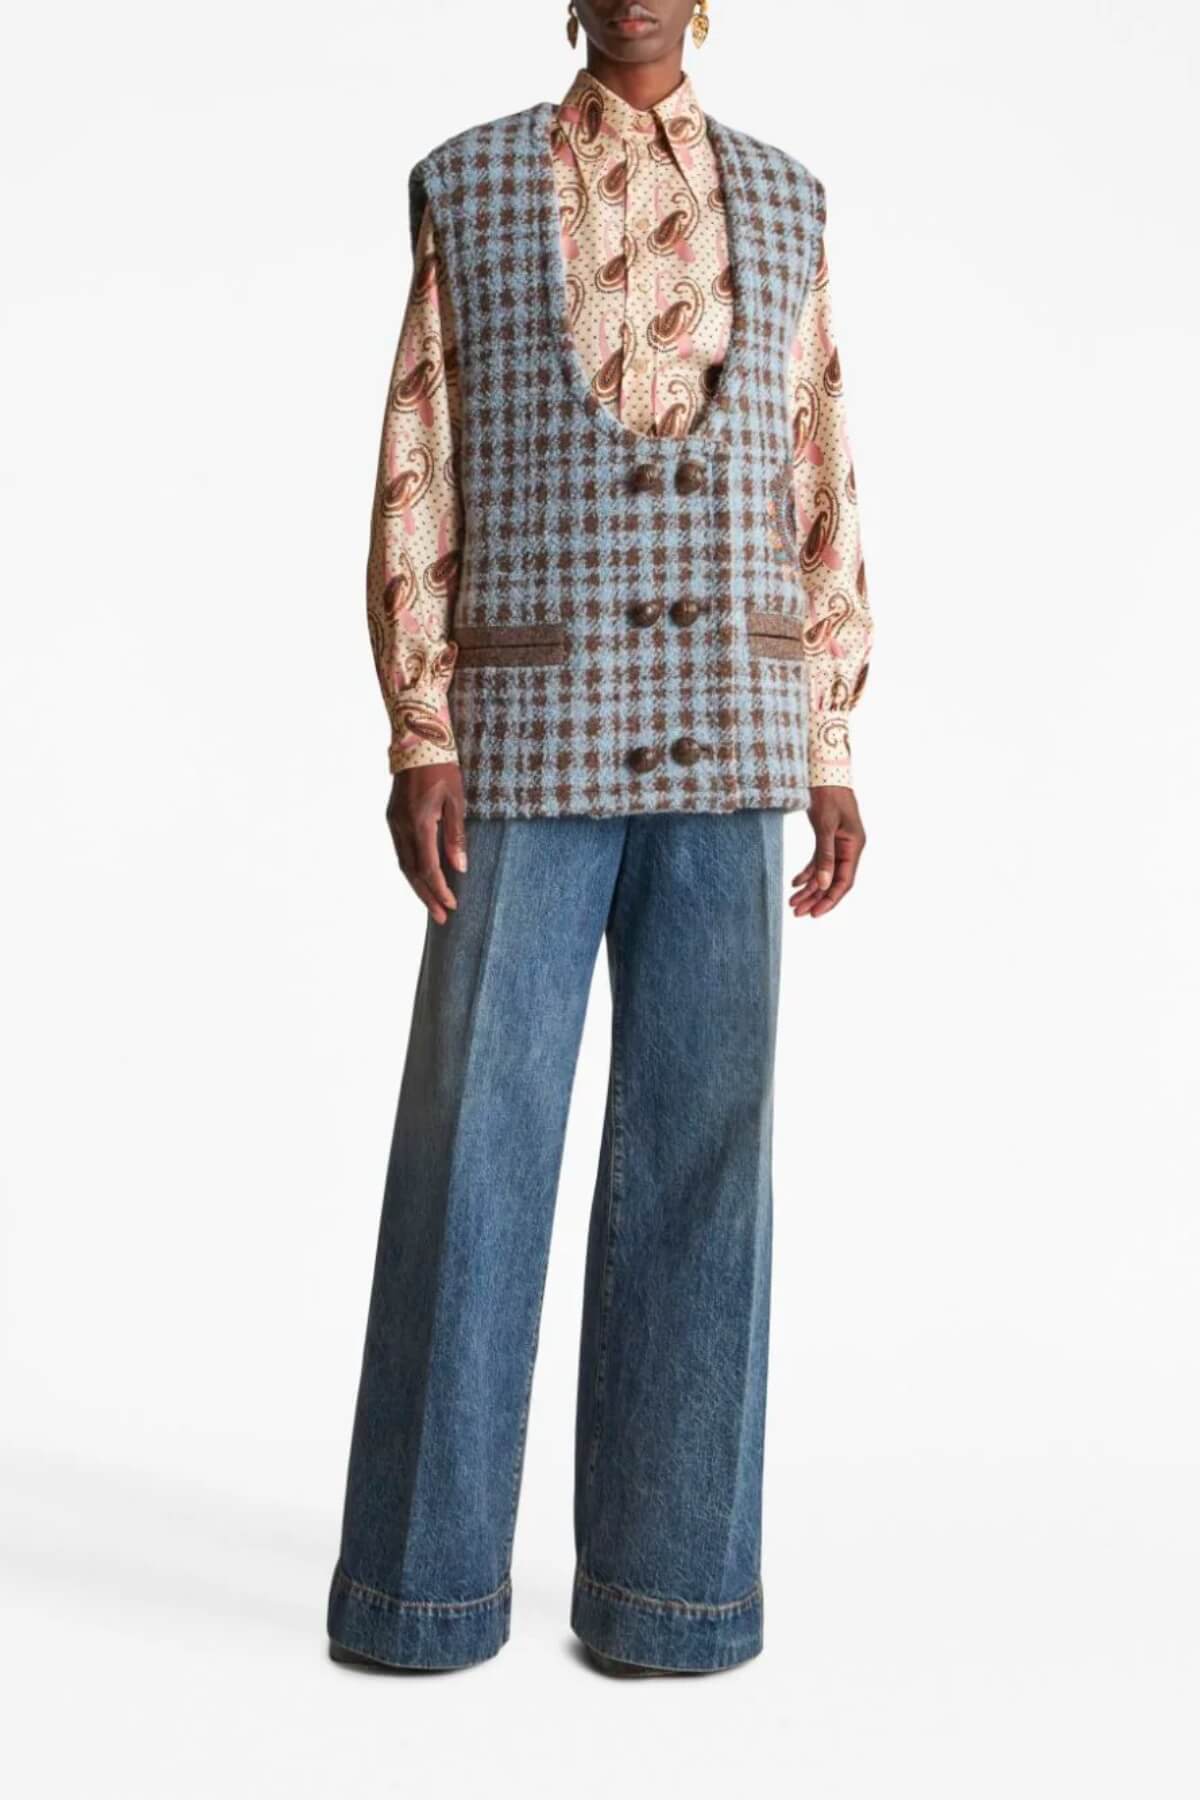 Etro Embroidered Houndstooth Waistcoat - Blue